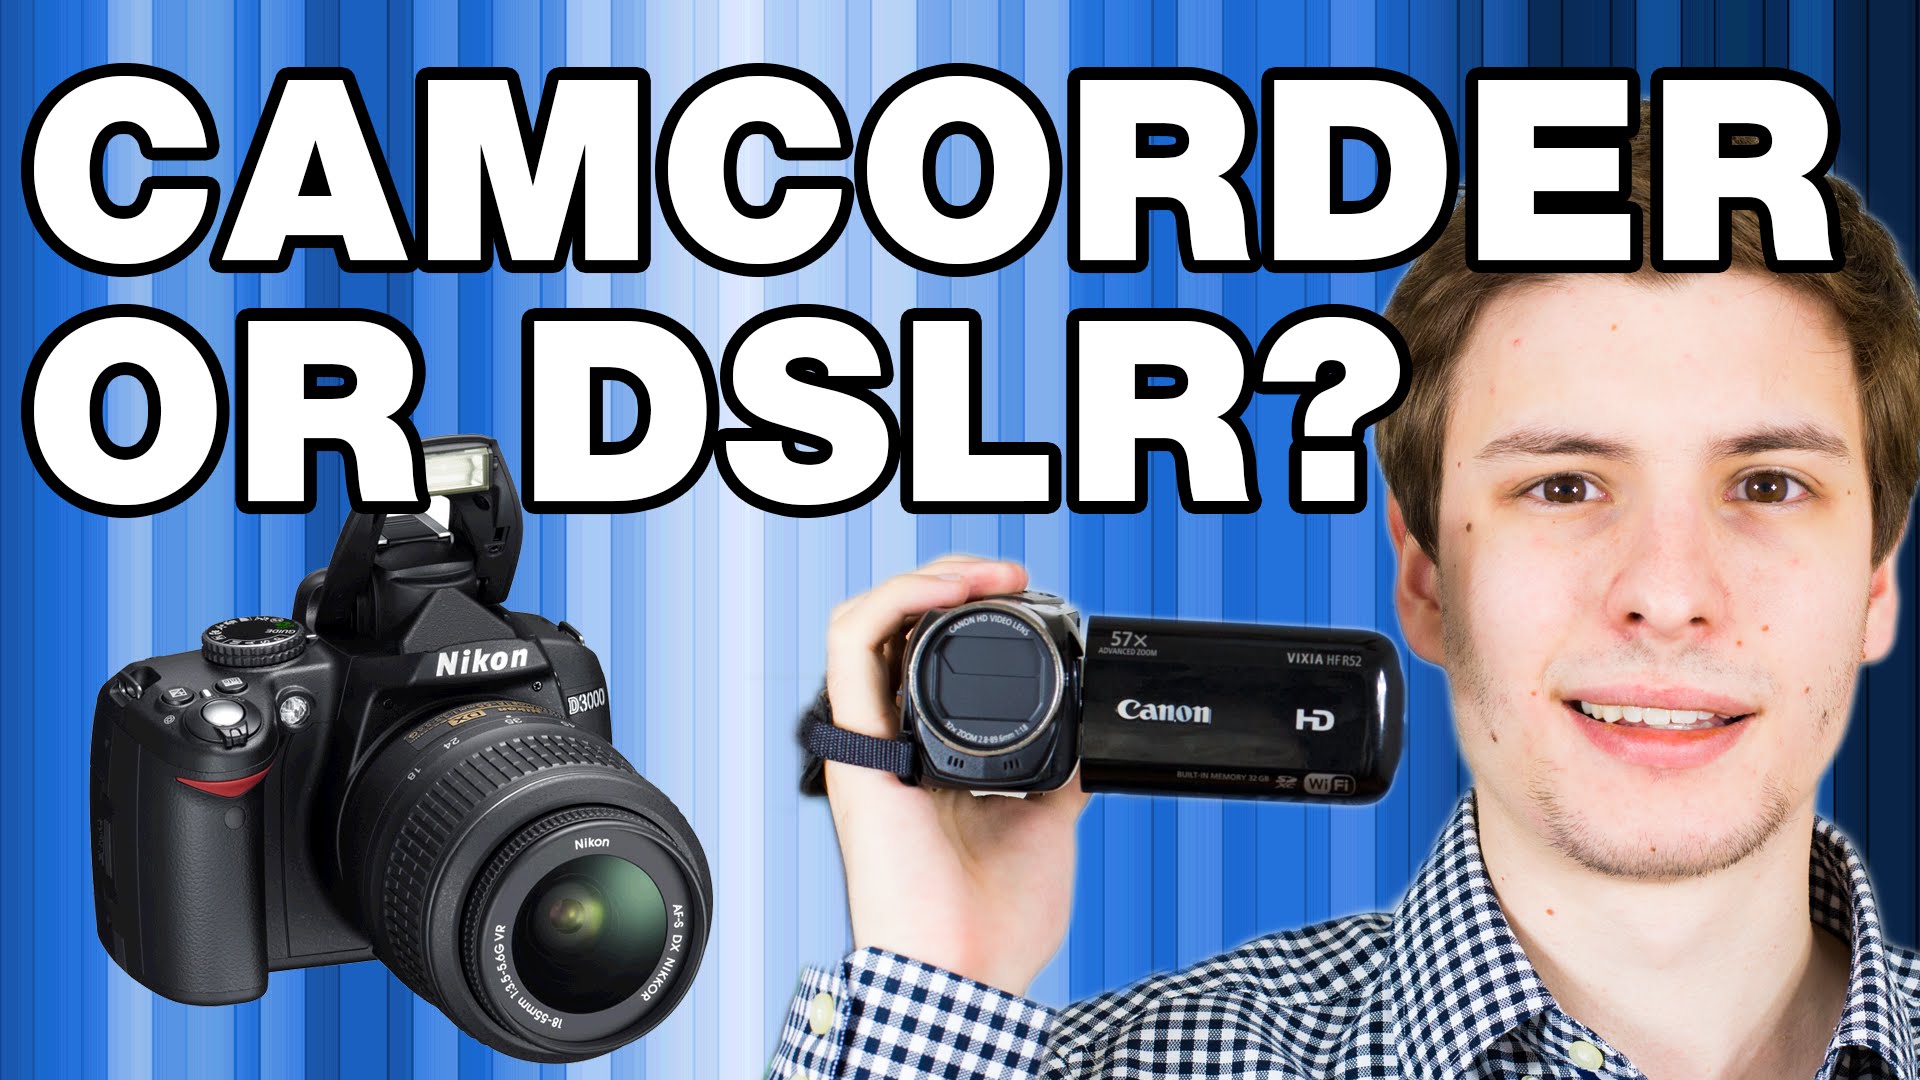 DSLR or Camcorder for Video? – ThioJoeTech